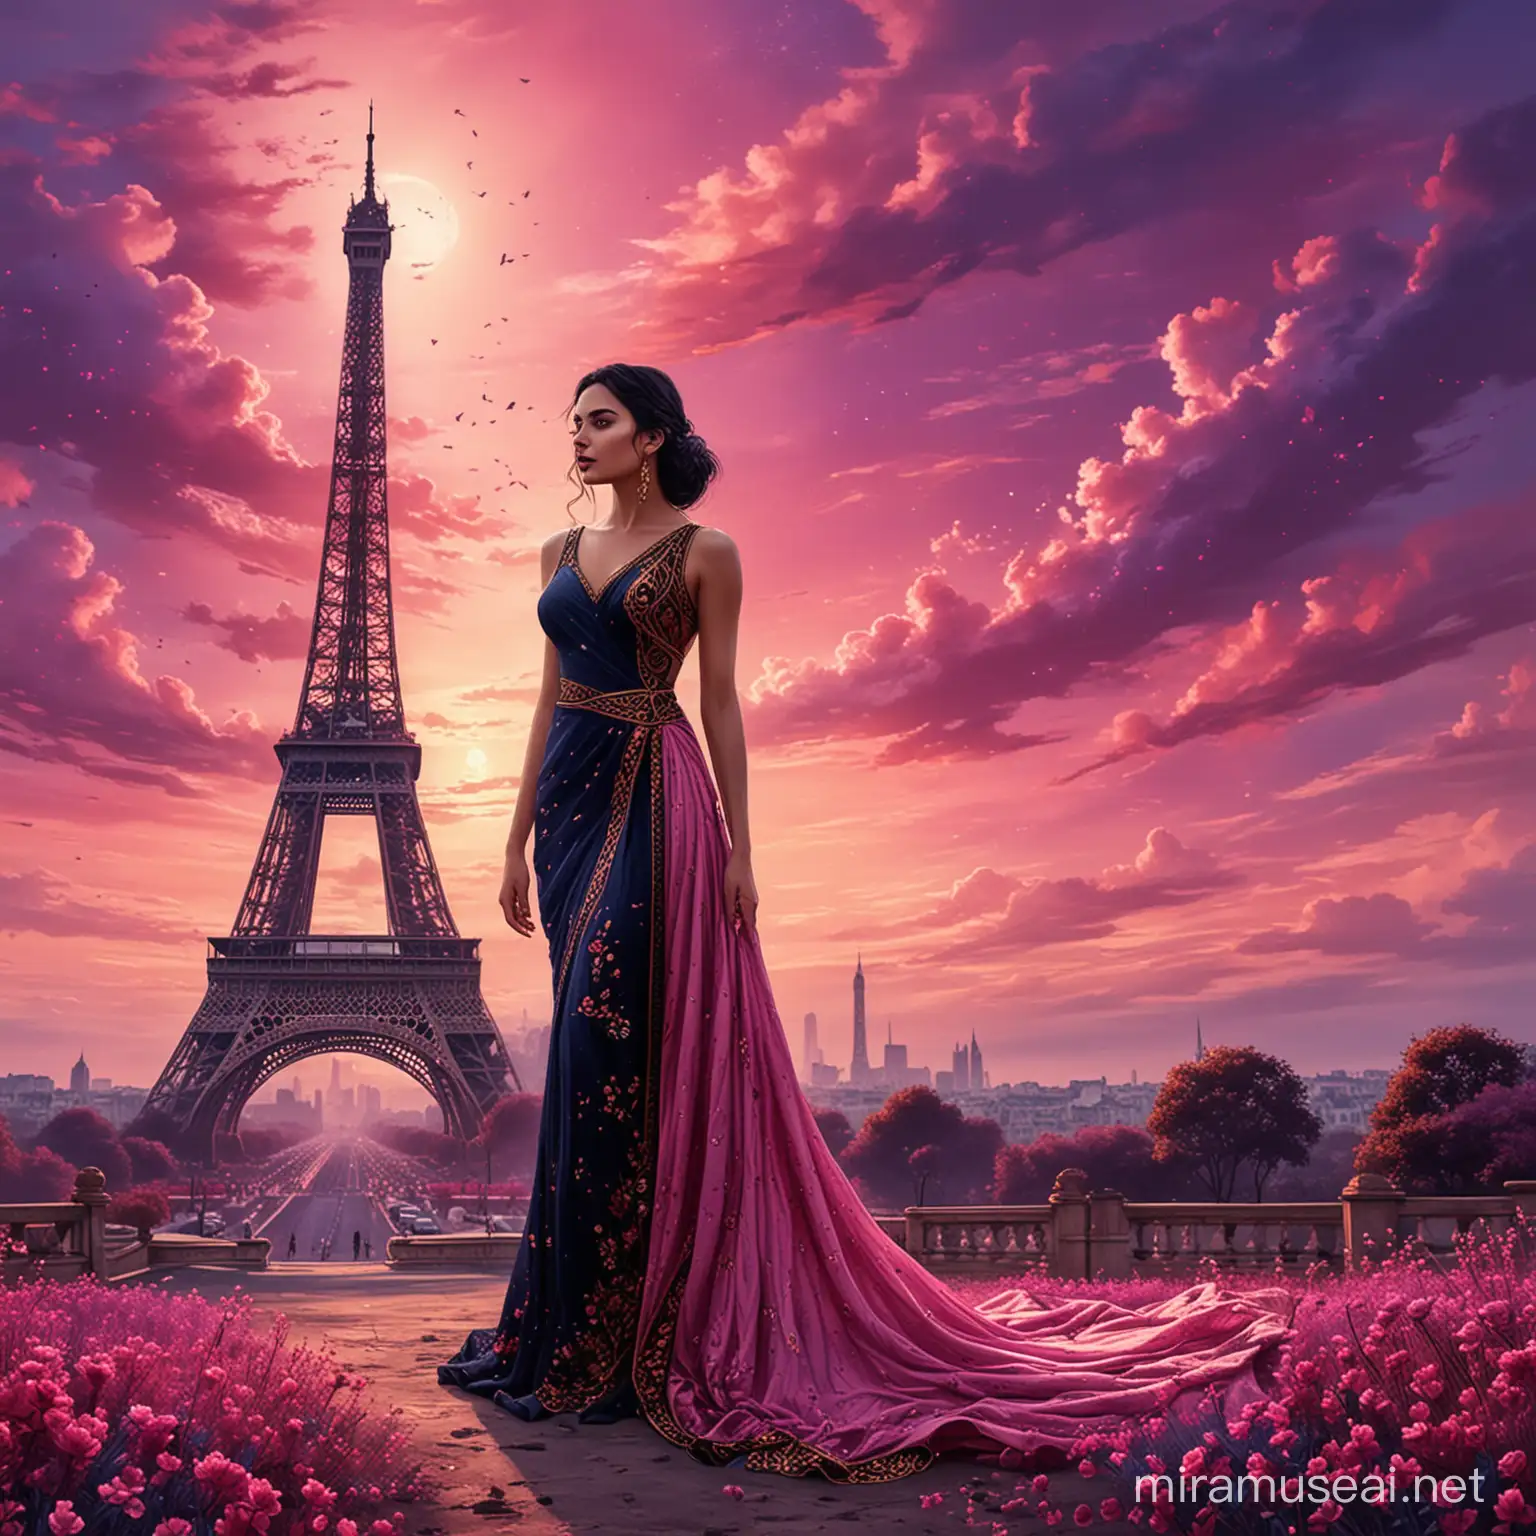 A beautiful woman, standing up on dark purple dust, surrounded by dark pink flowers. Long black braid. Long elegant dark red and blue dress, haute couture, sari tissu. Background dark pink sky. Background beautiful tower effel decorated with golden light. Digital art, illustration, digital illustration, digital painting